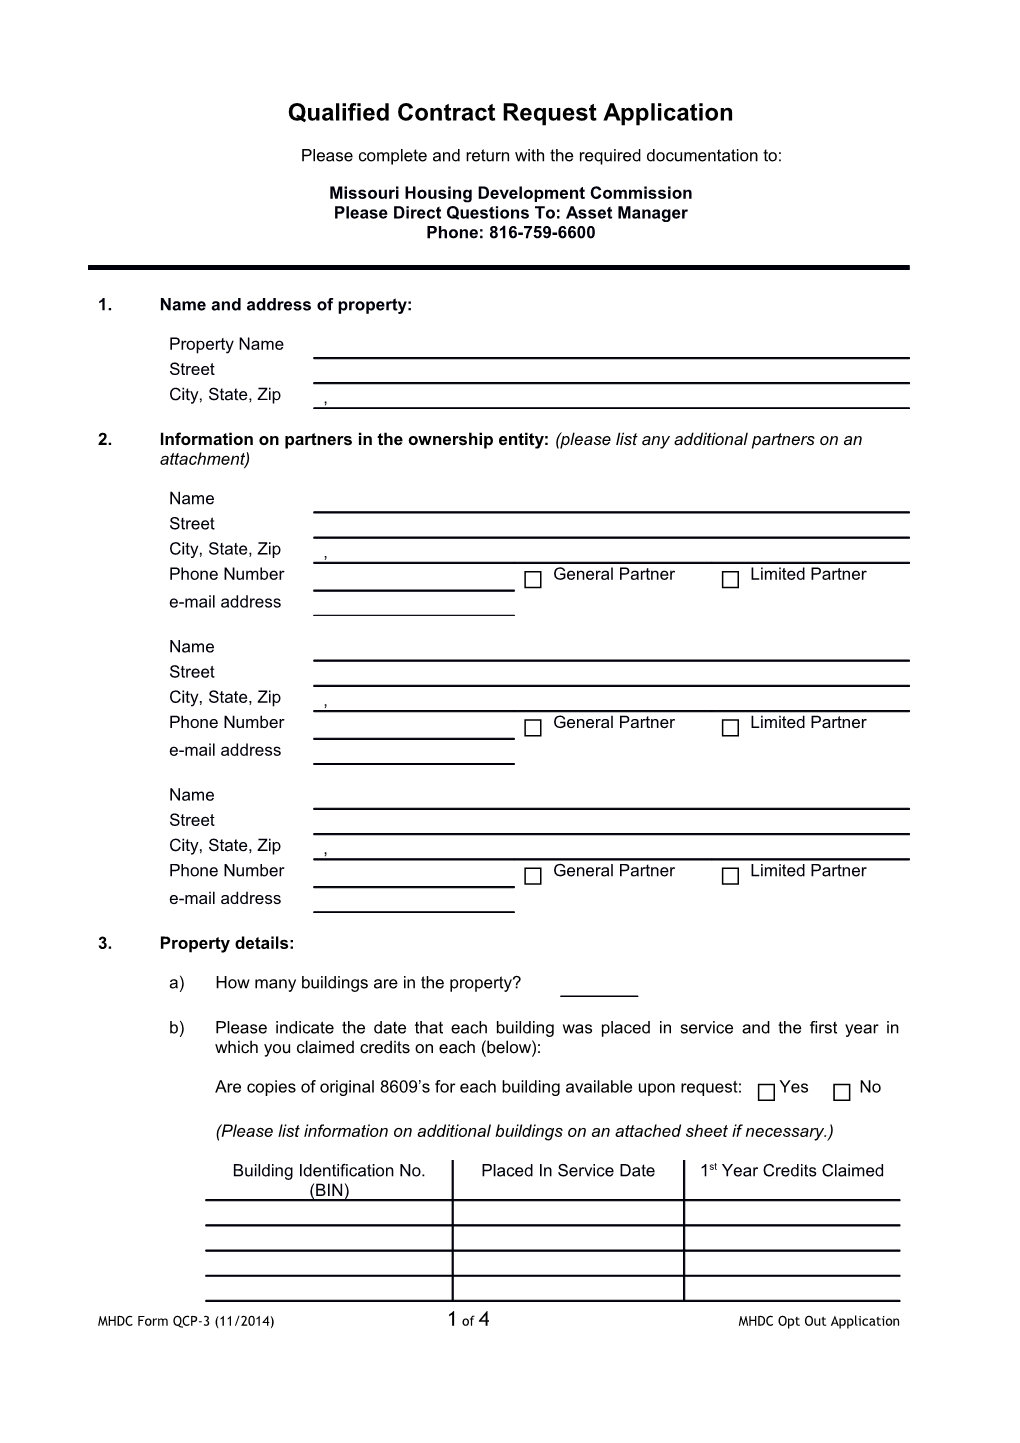 Qualified Contract Request Application